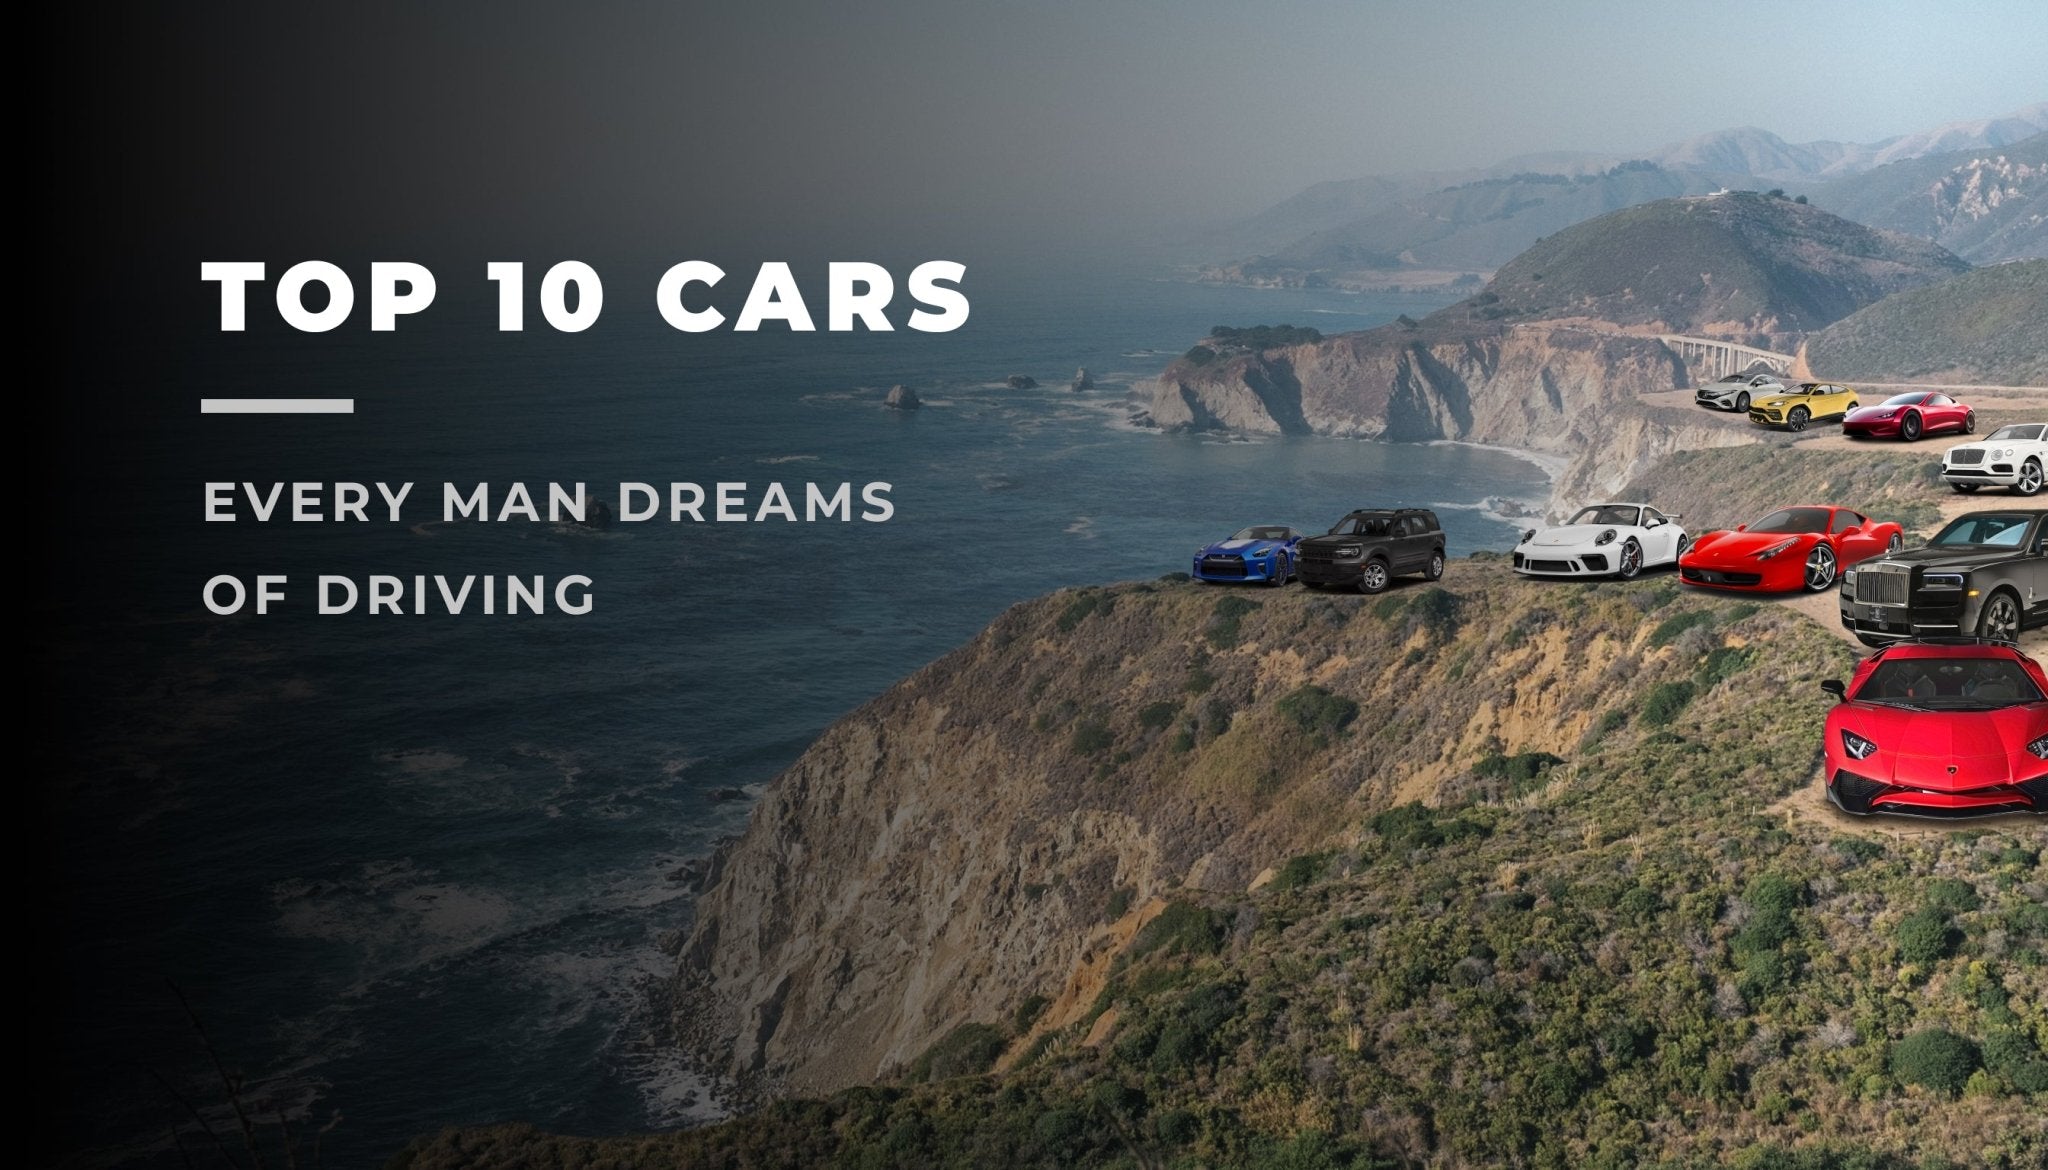 Top 10 Cars Every Man Dreams of Driving - Elegatto